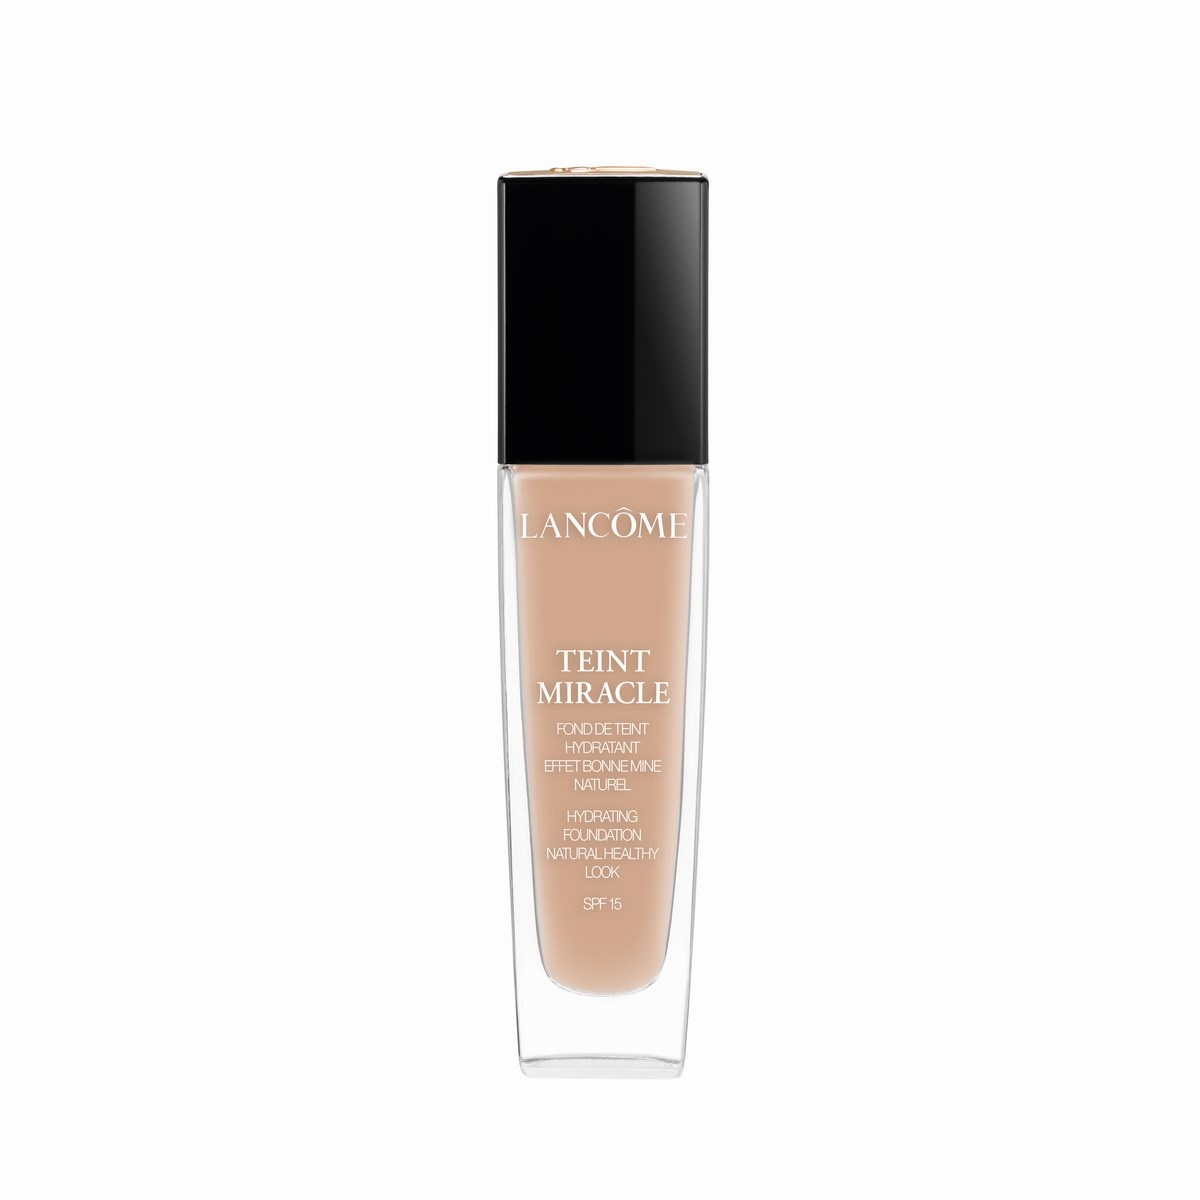  Teint Miracle Hydrating Foundation